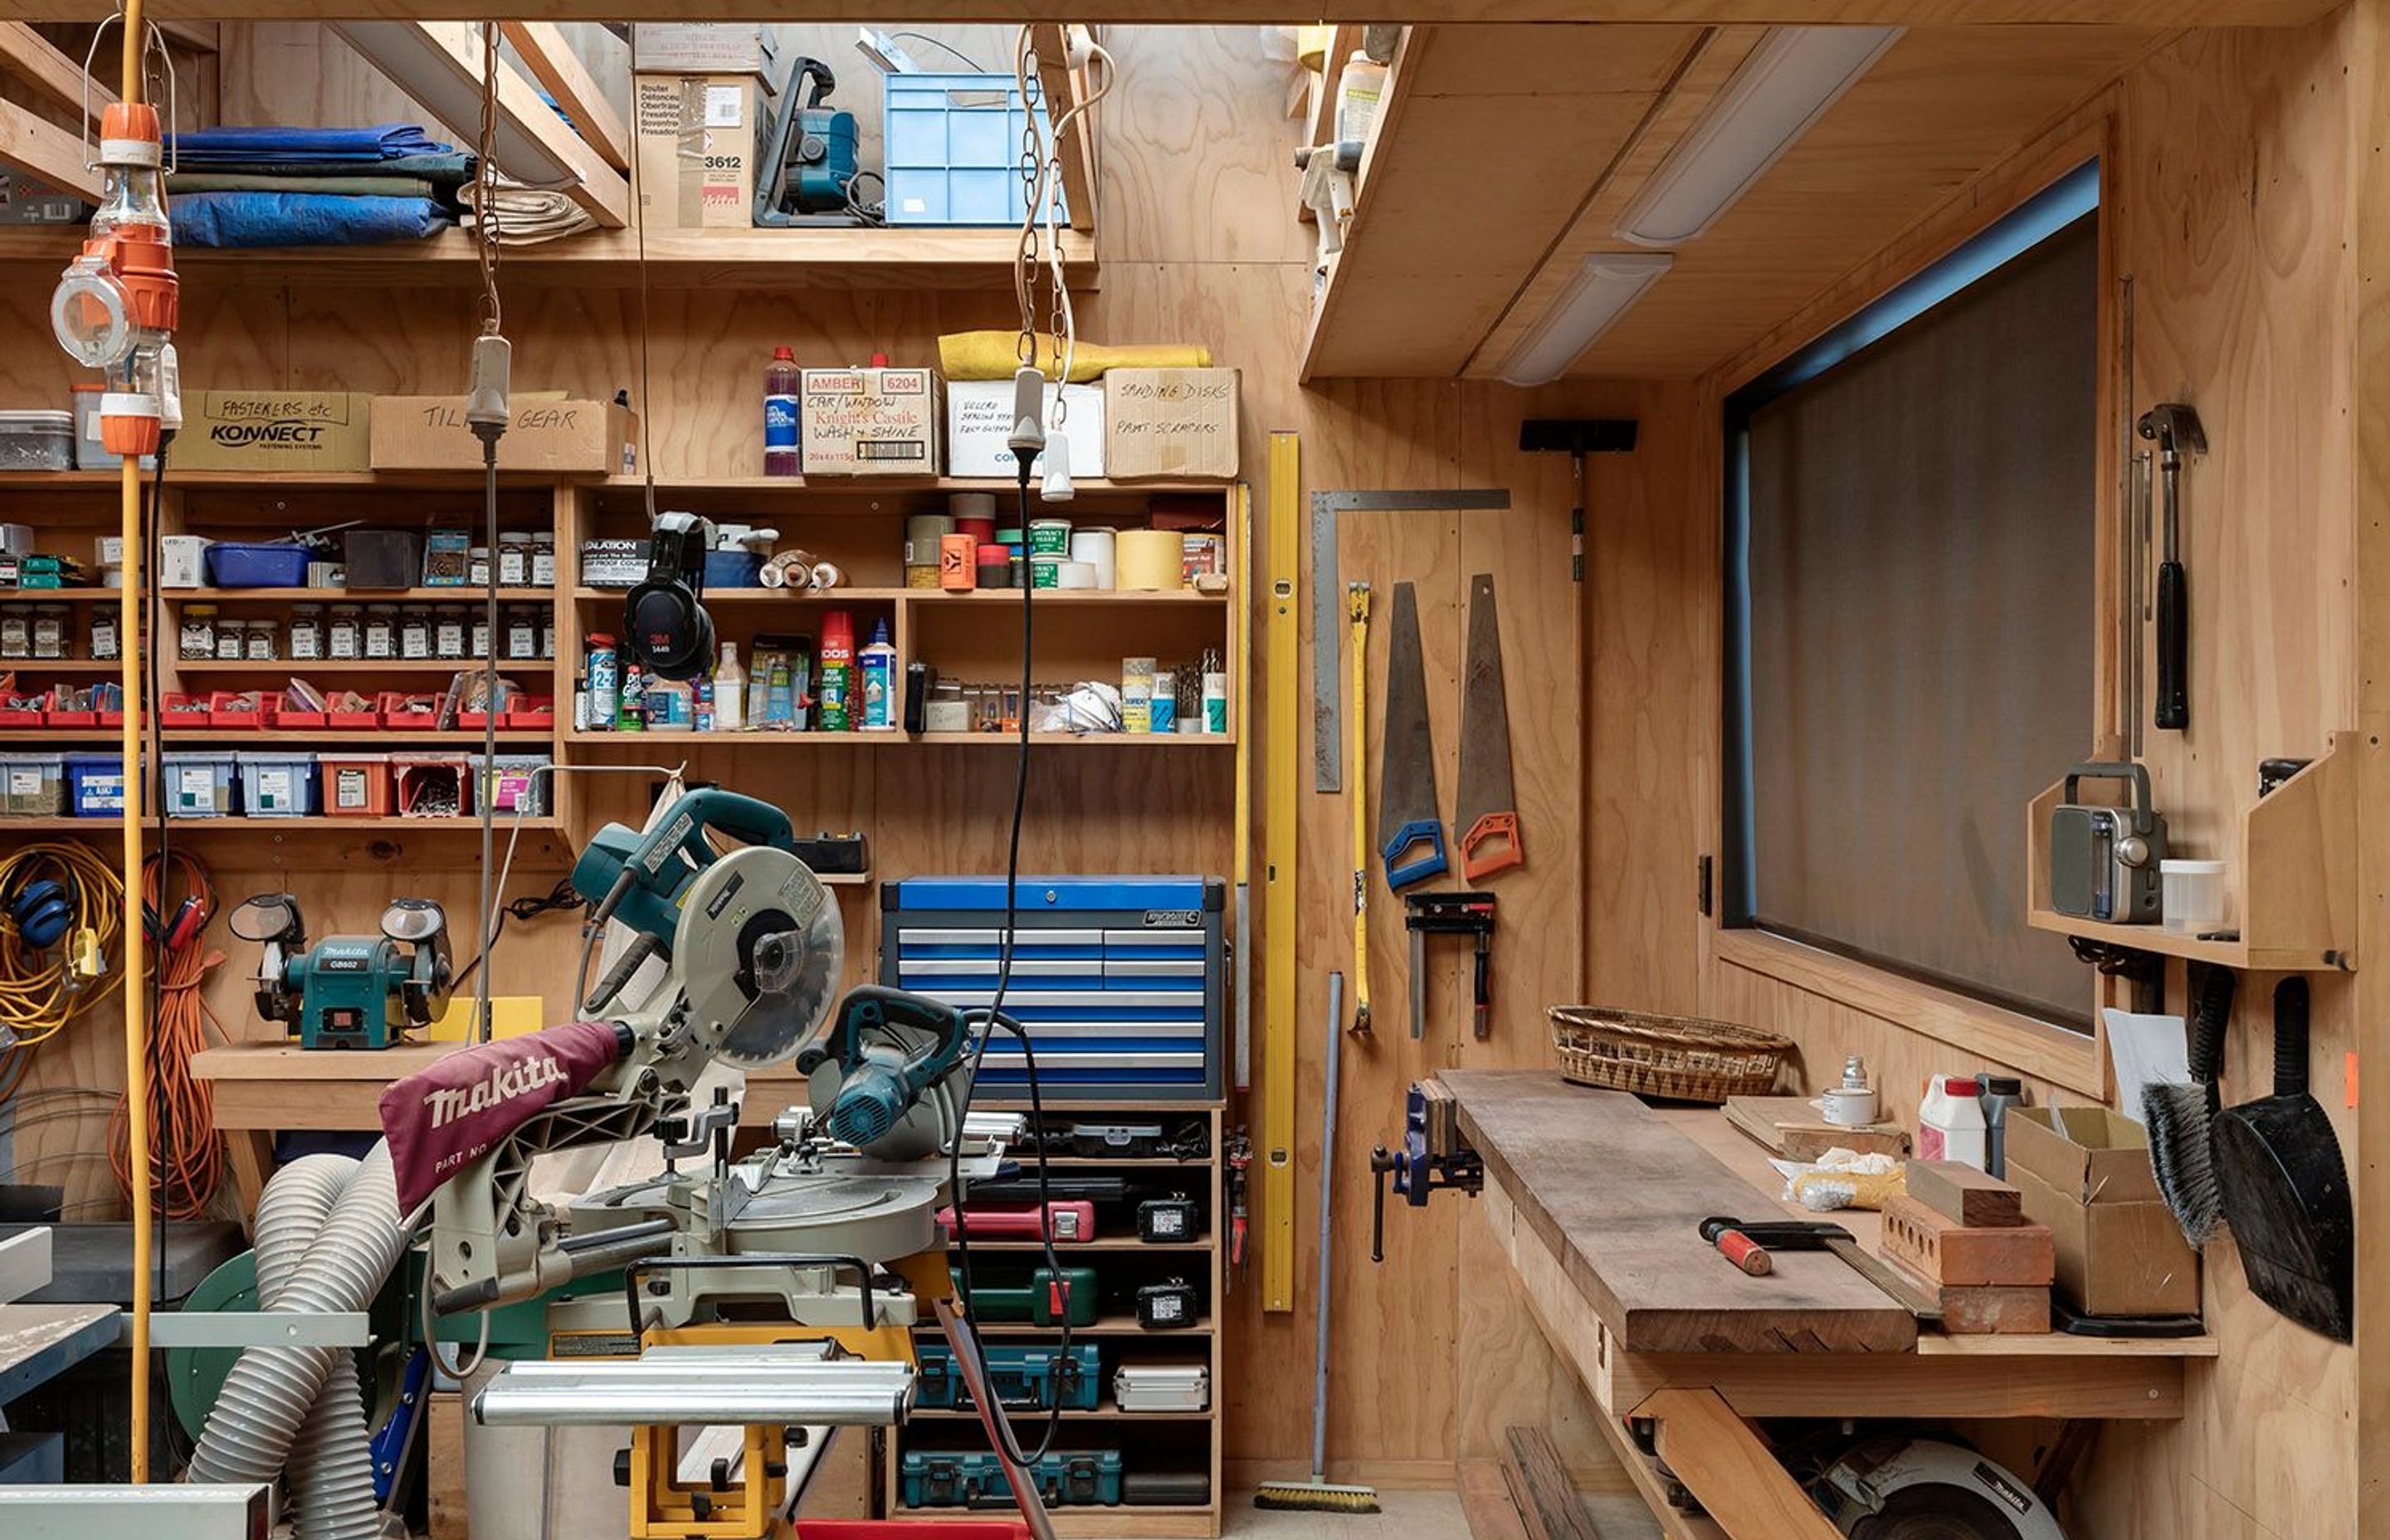 The house needed to incorporate the clients' passions and this was realised in a full woodwork workshop as well as a separate sewing room.